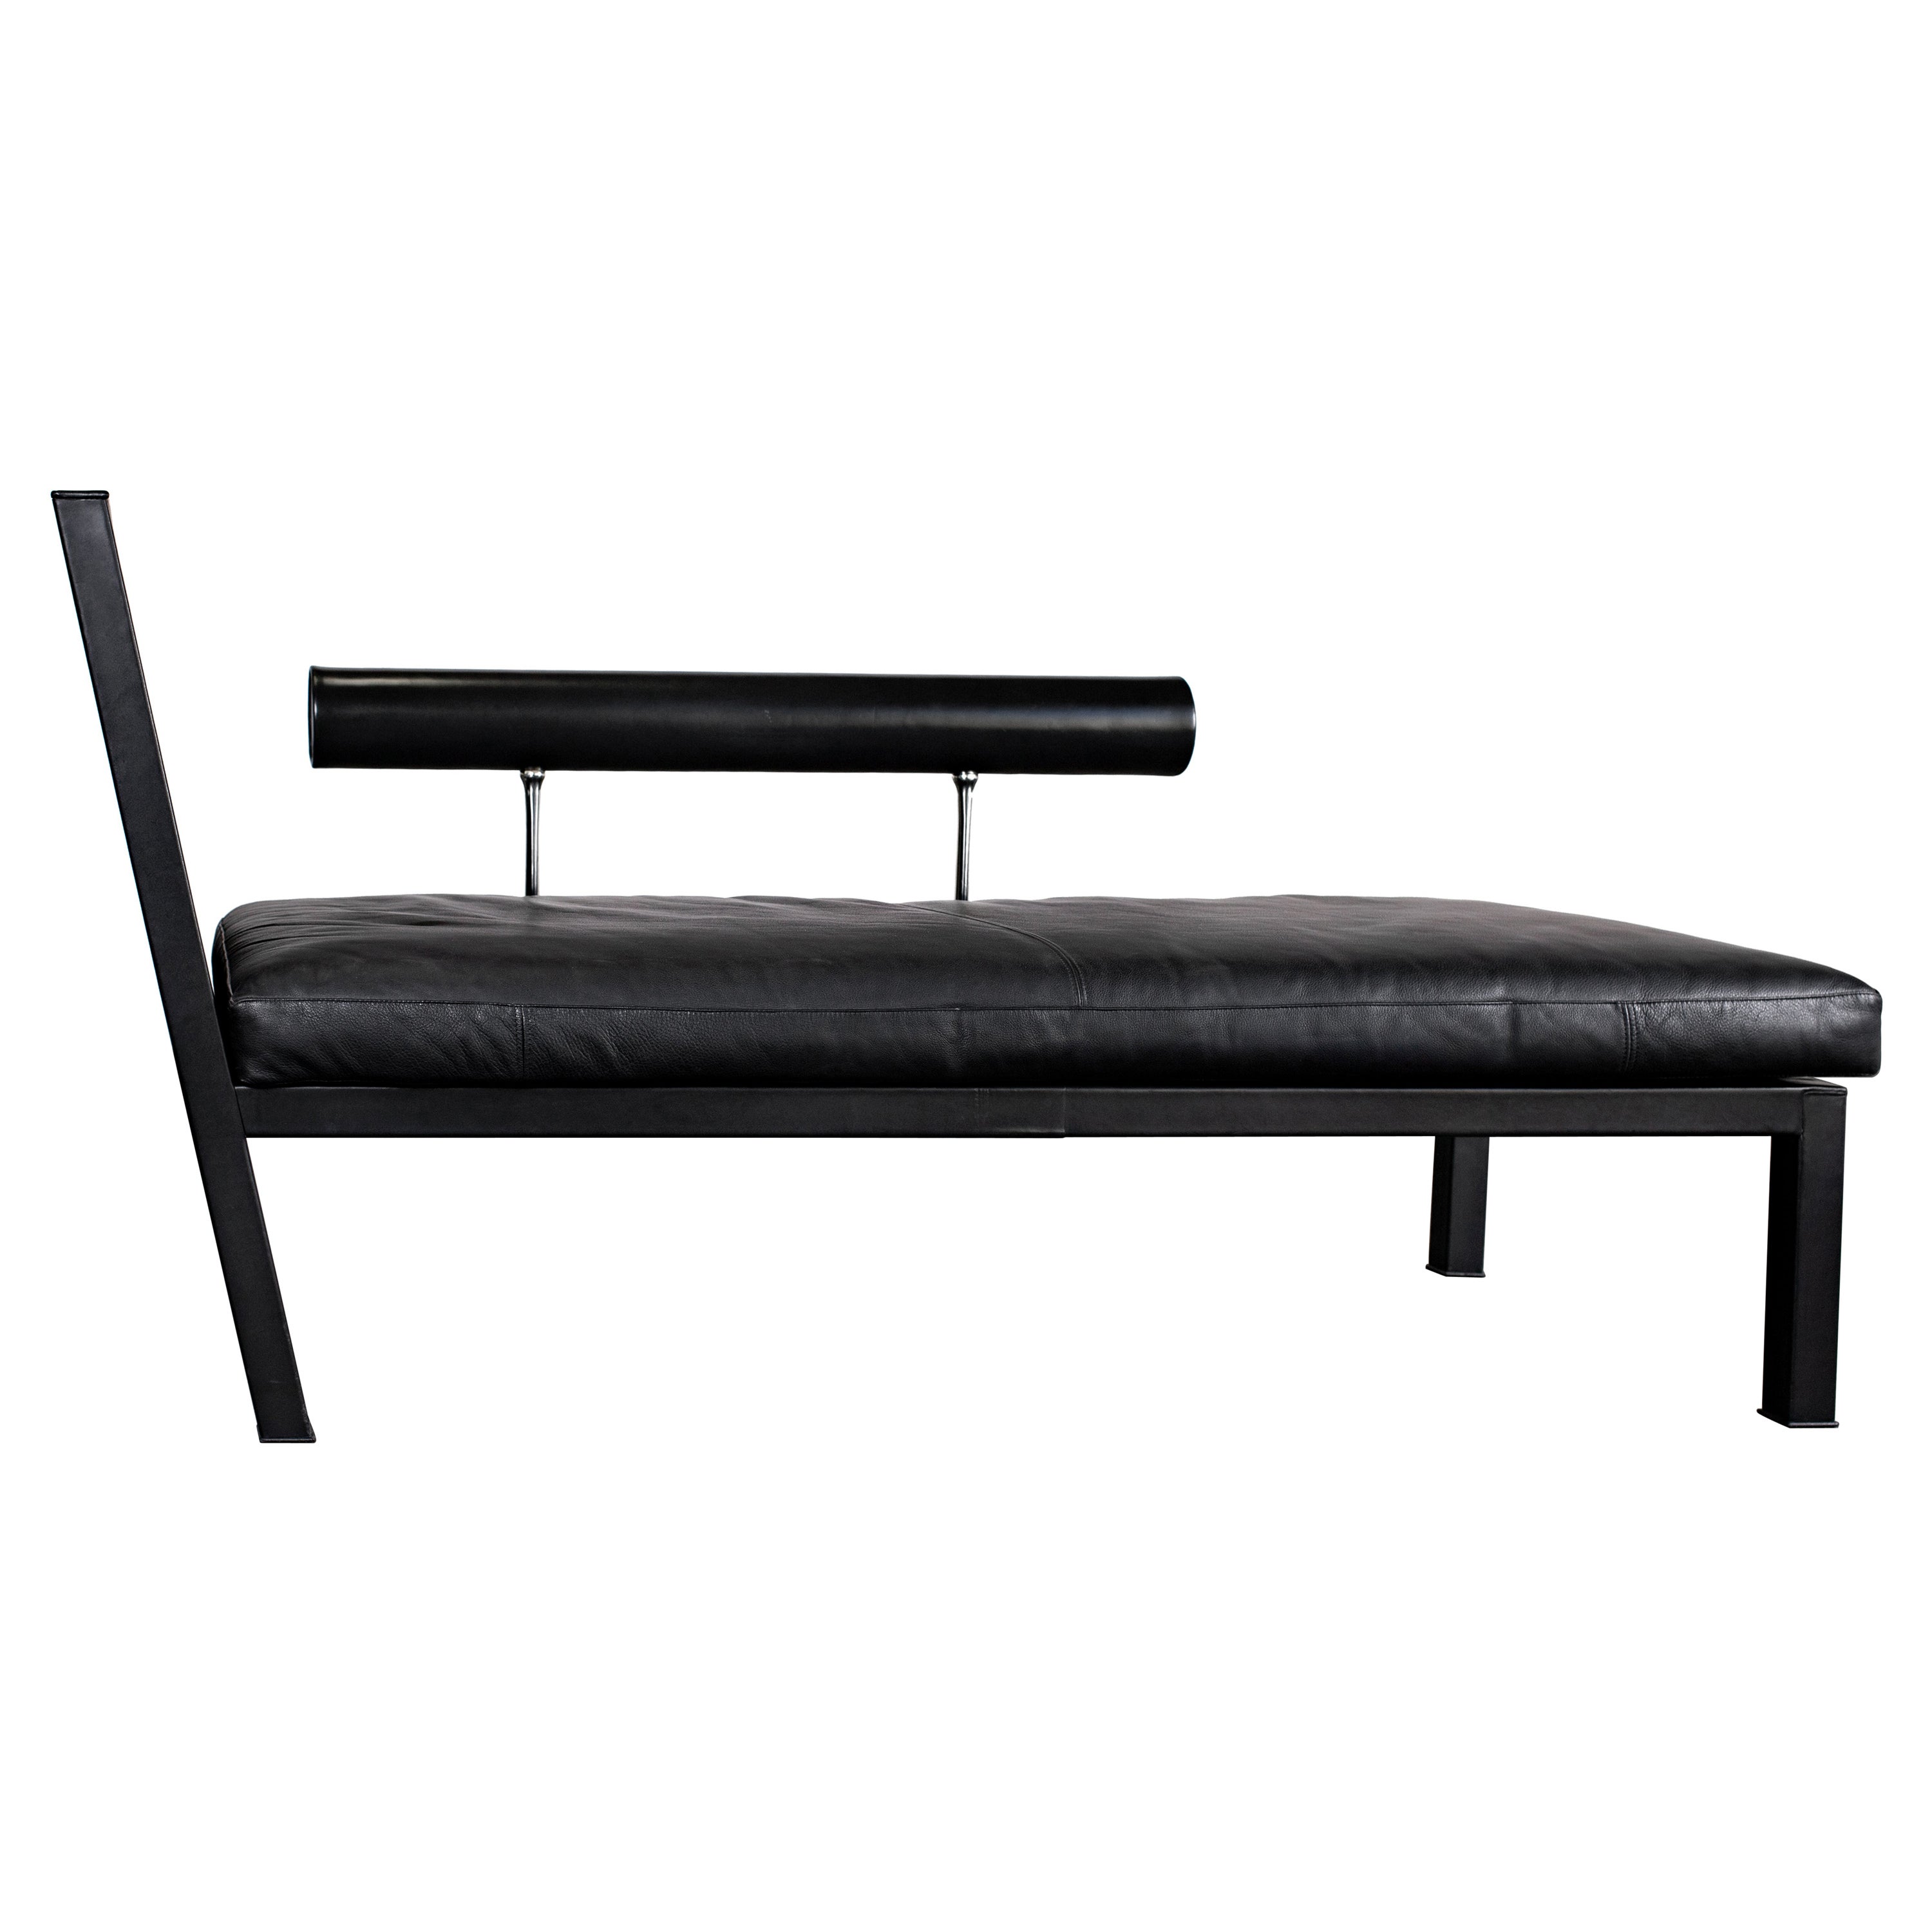 Citterio "Sity" Chaise Lounge for B&B Italia in Black Leather on Black Leather